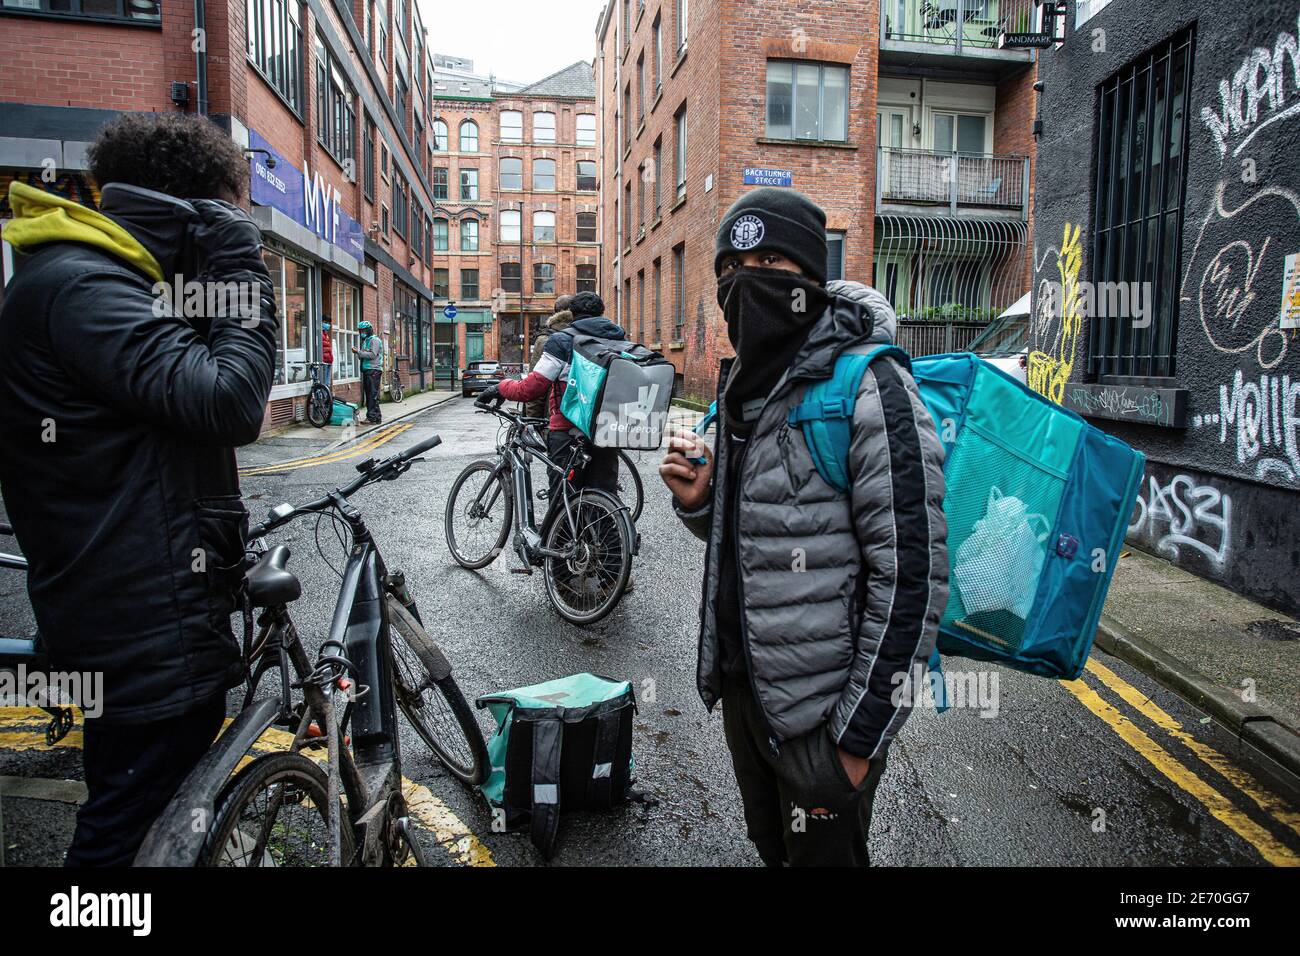 Deliveroo workers / riders in Manchester, first generation immigrants, predominantly coming from the Middle East and Eritrea. Stock Photo